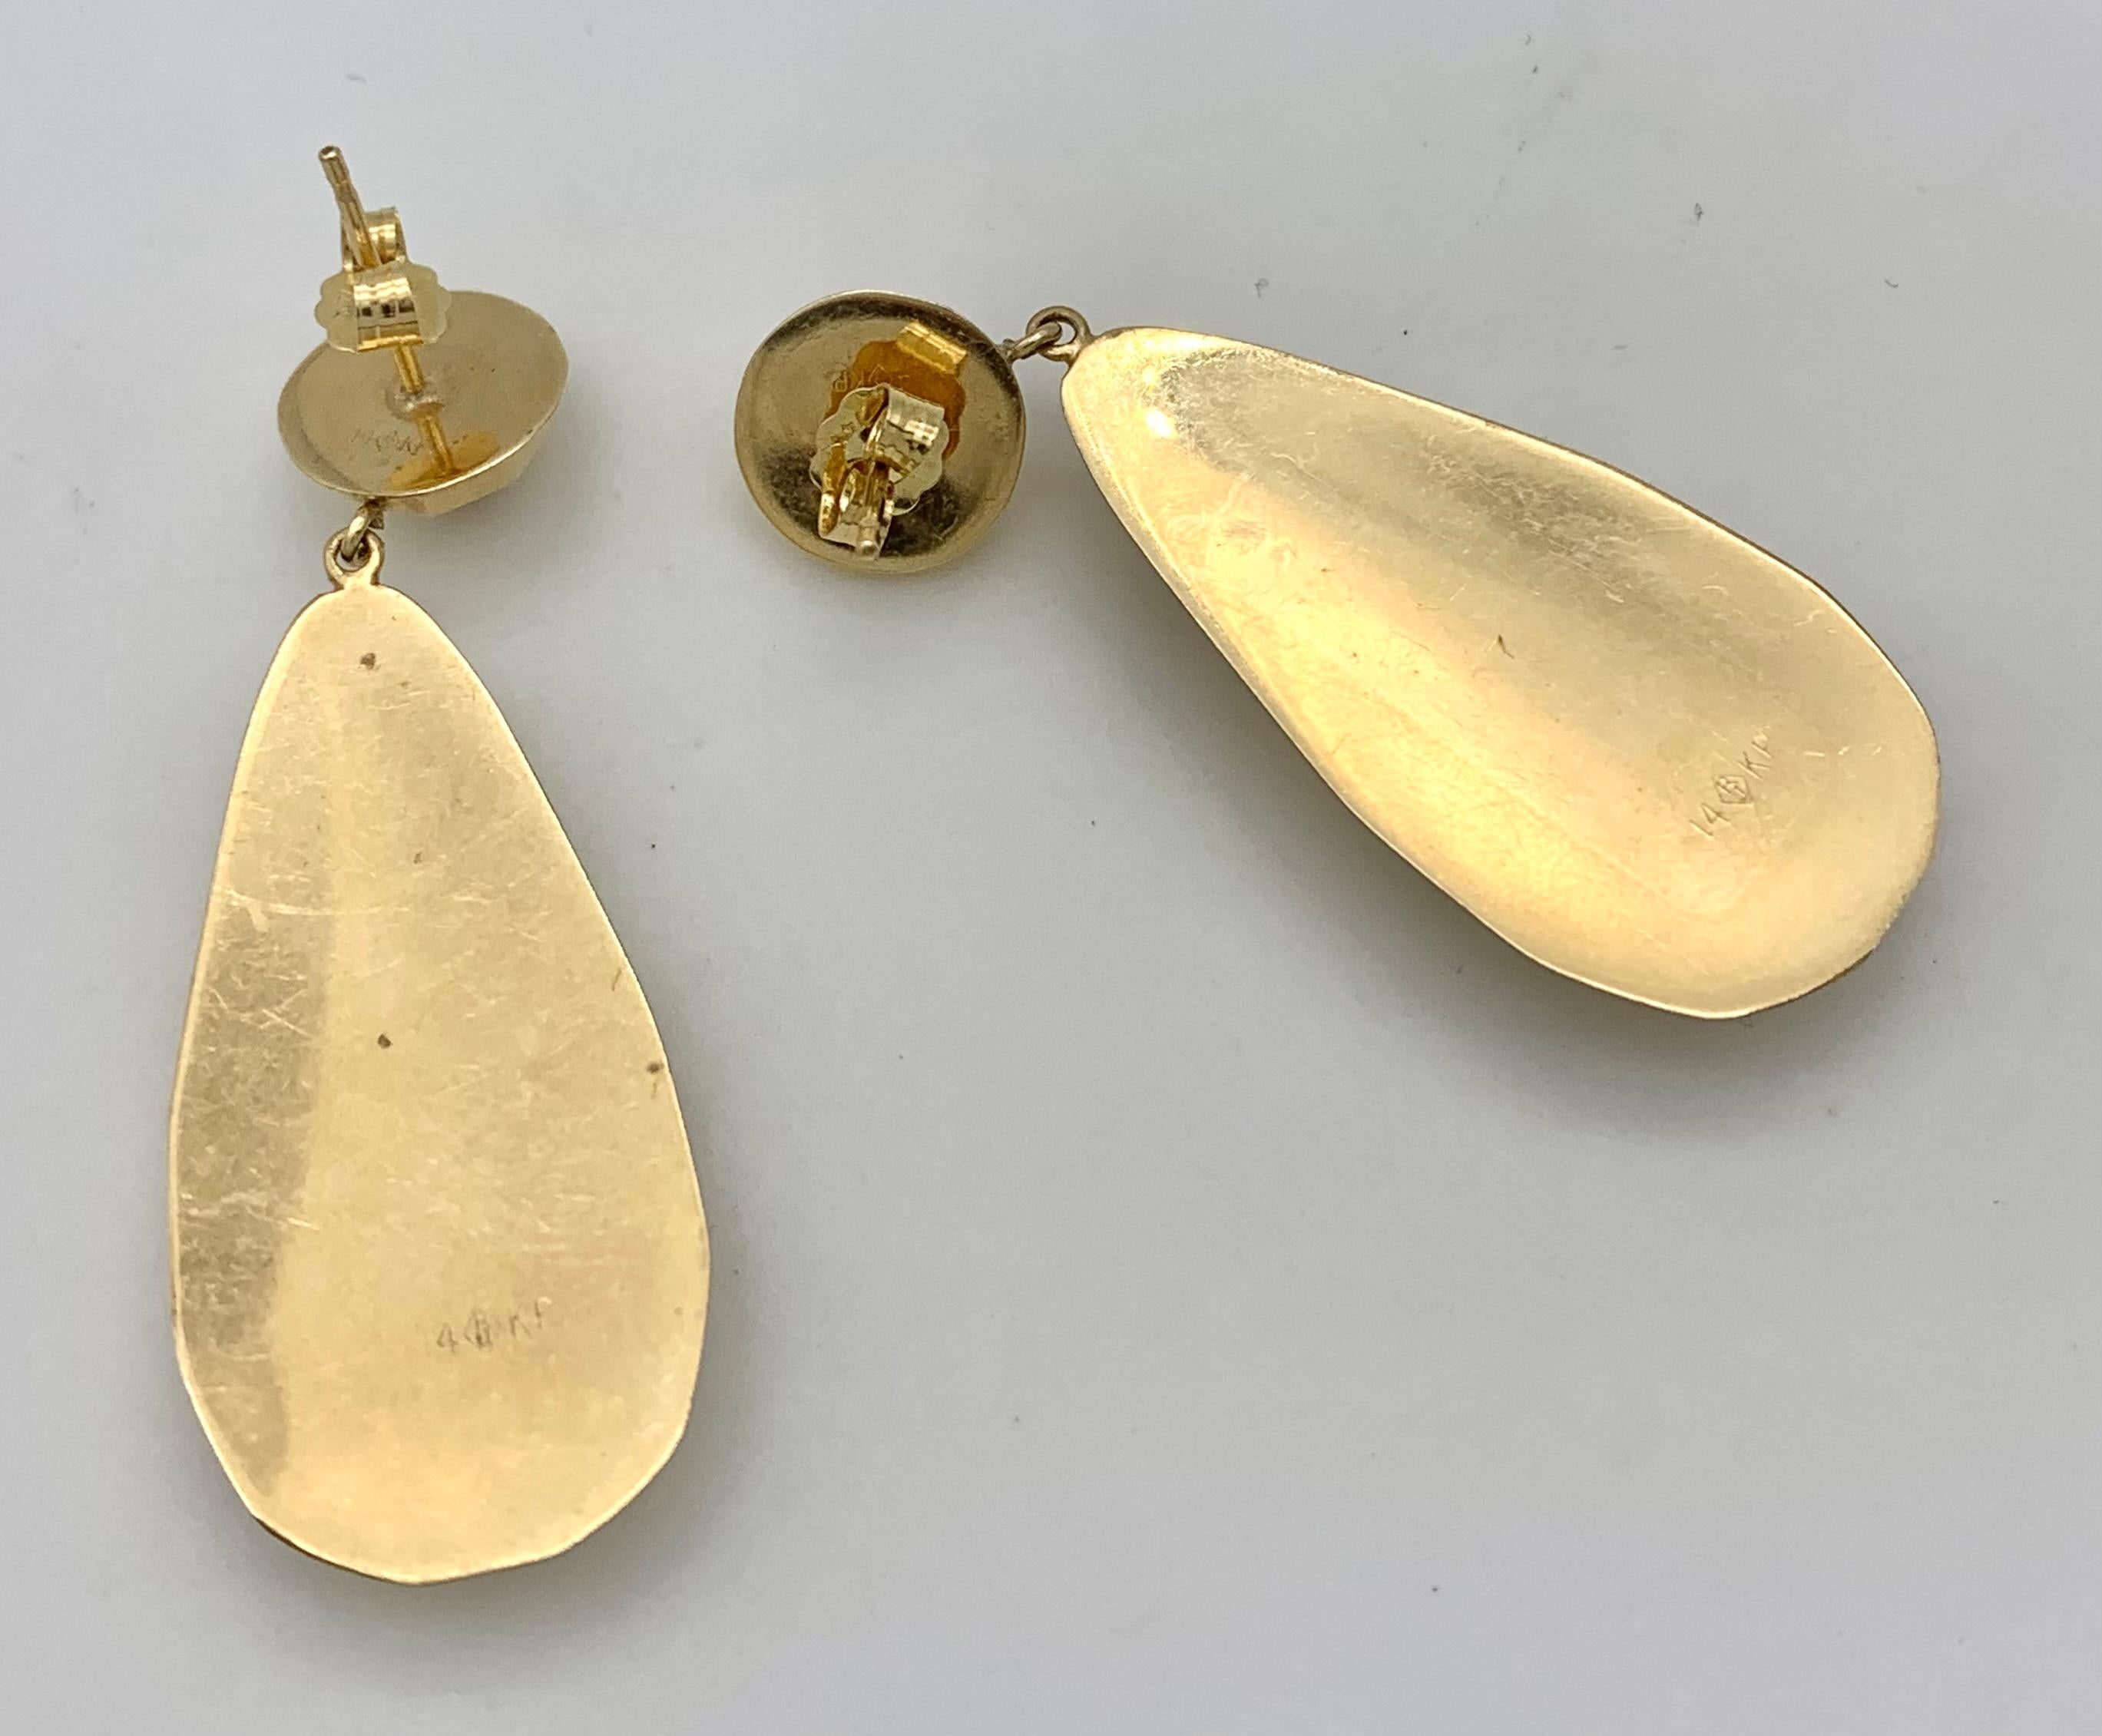 These dangling earrings with their facetted surface are made out of 14 karat gold. Despite their large size the earrings are very comfortable to wear because they are hollow.